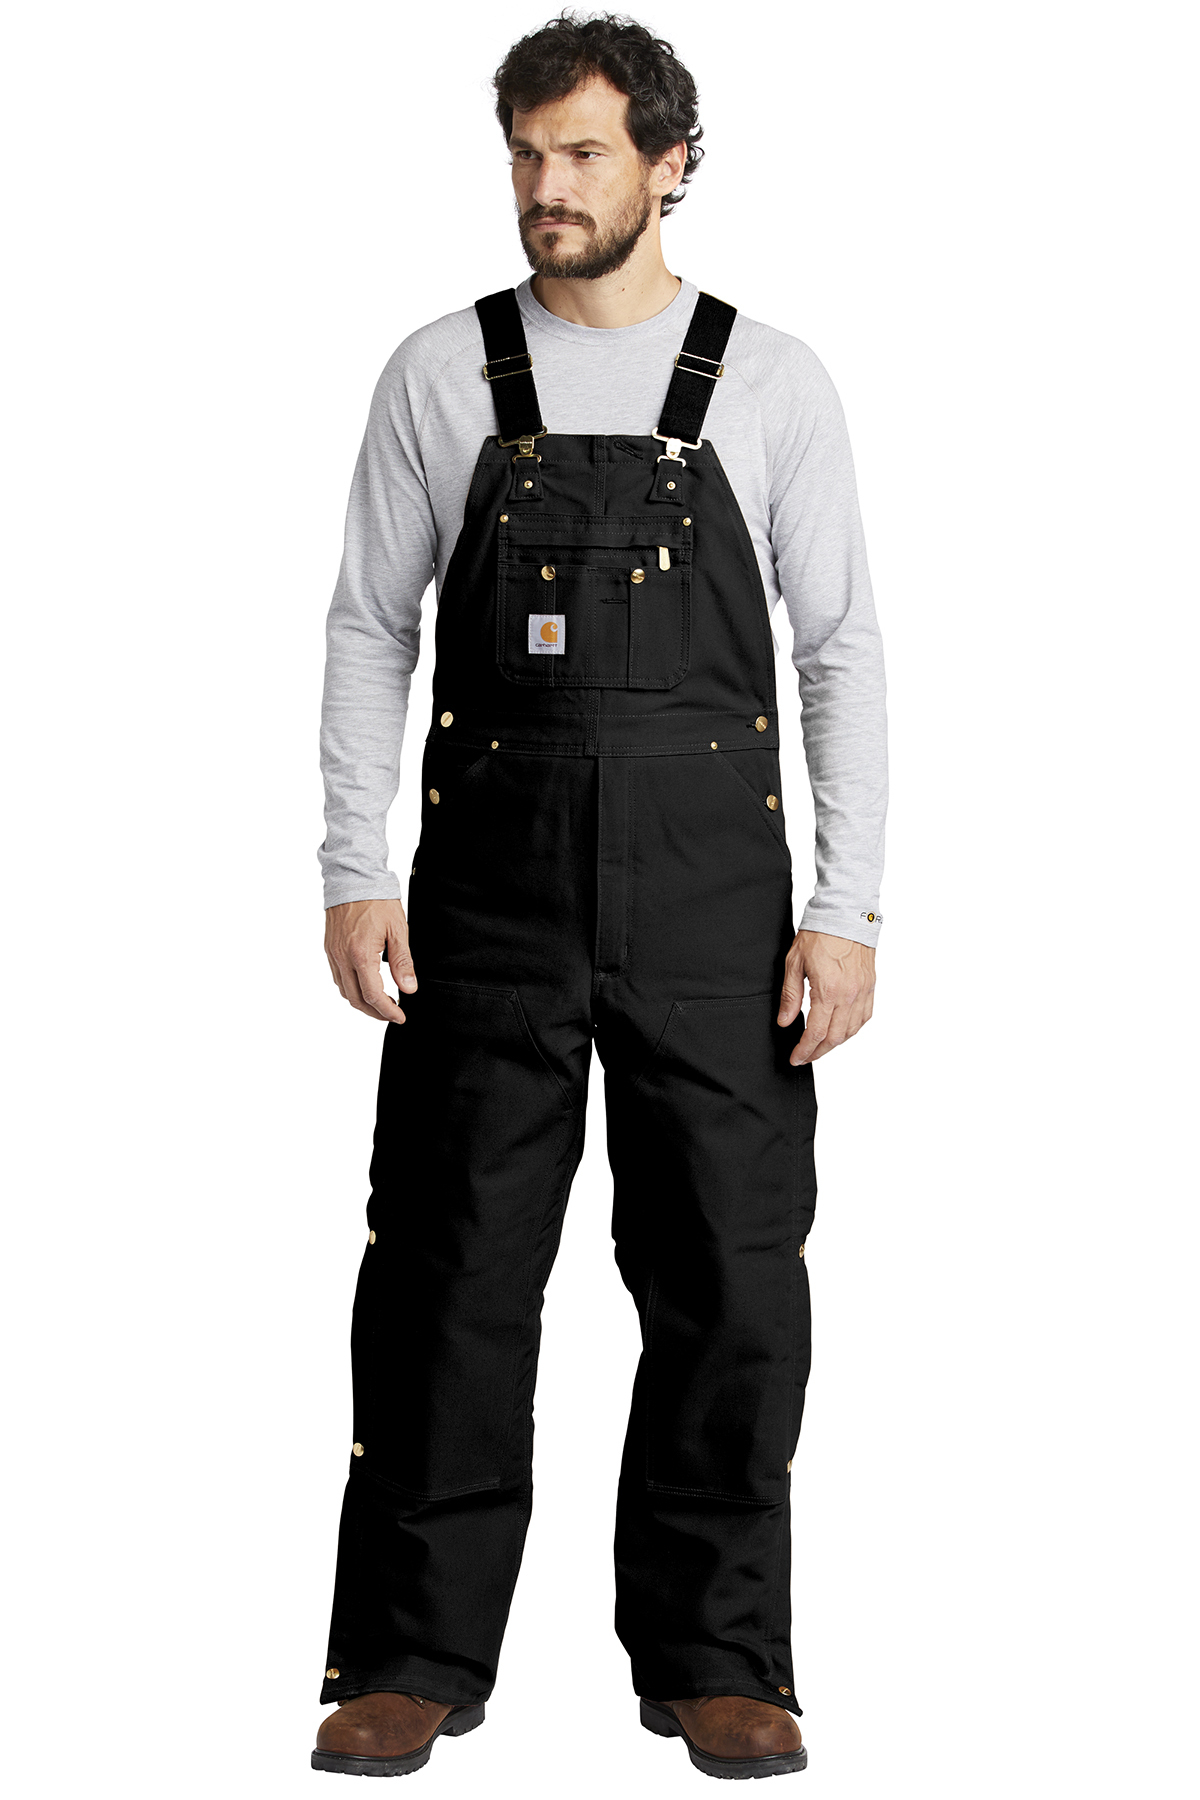 Carhartt Duck Quilt-Lined Zip-To-Thigh Bib Overalls | Product | SanMar